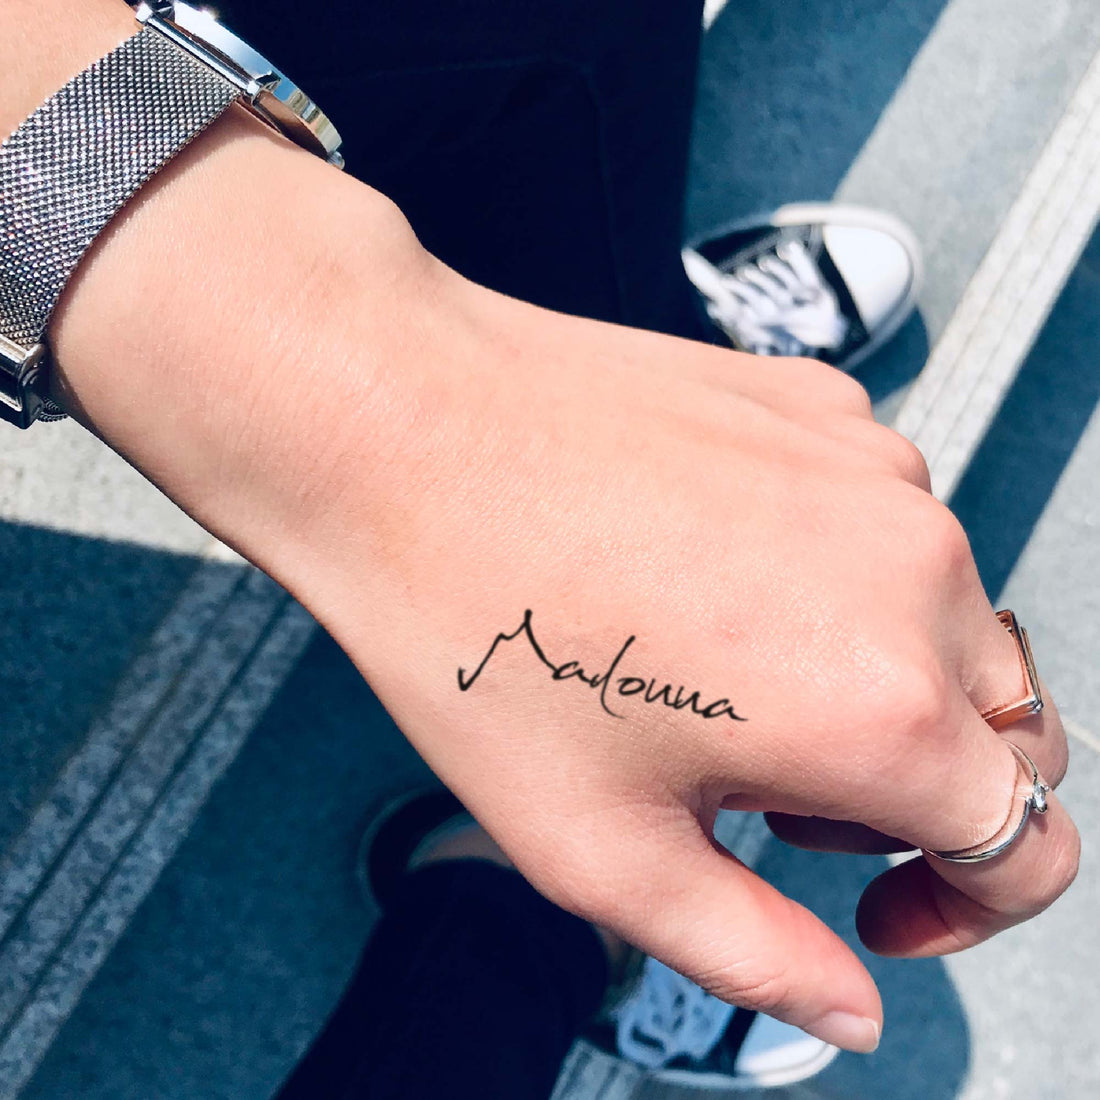 Madonna custom temporary tattoo sticker design idea inspiration meanings removal arm wrist hand words font name signature calligraphy lyrics tour concert outfits merch accessory gift souvenir costumes wear dress up code